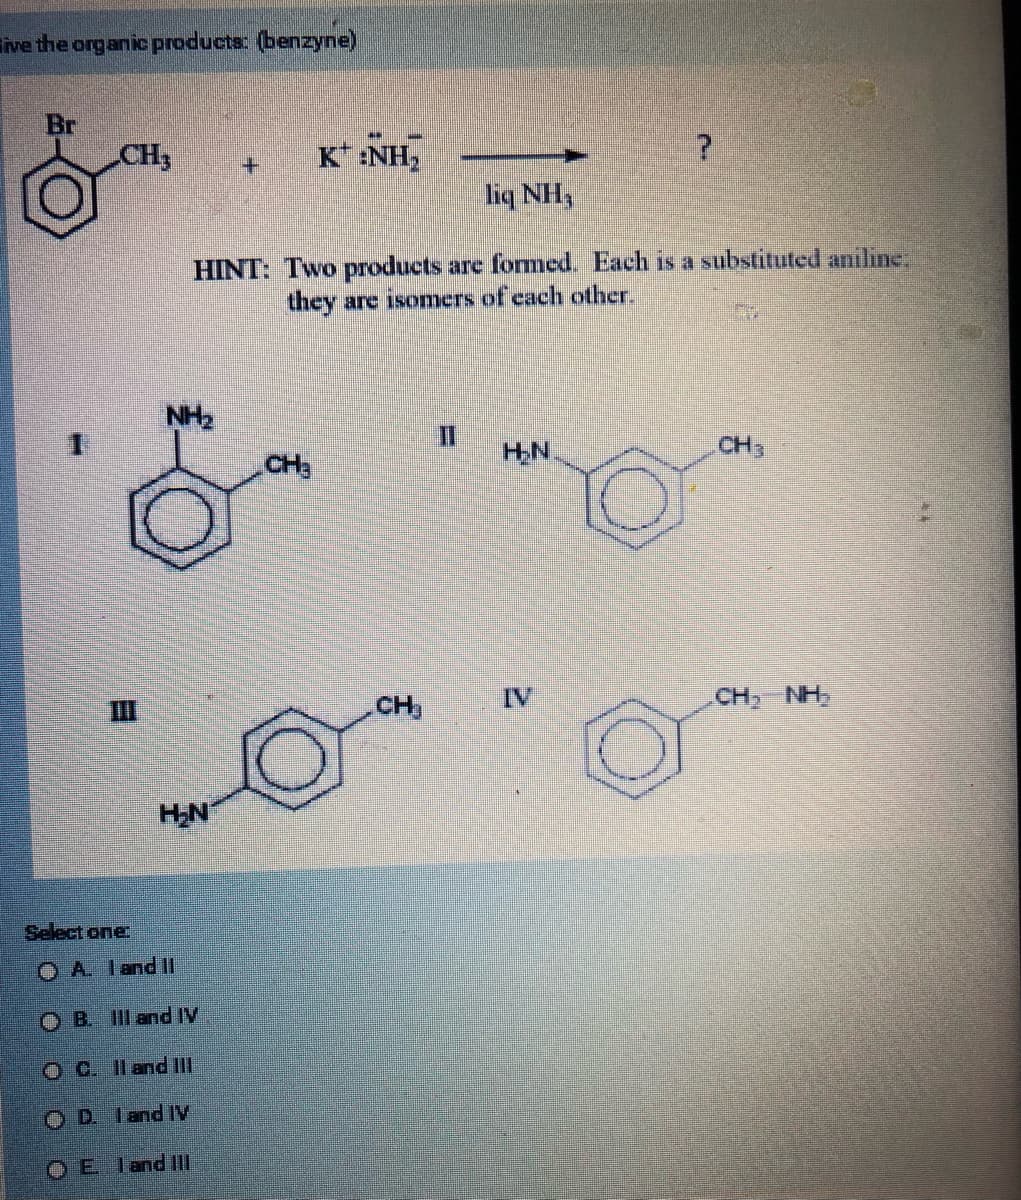 ive the organic products: (benzyne)
Br
CH3
H₂N
+
Select one:
A. I and II
OB. III and IV
OC. II and III
ⒸD land Iv
Eland III
NH,
HINT: Two products are formed. Each is a substituted aniline:
they are isomers of each other.
KINH,
CH
O
CH₂
H₂N
?
IV
CH3
CH, NH